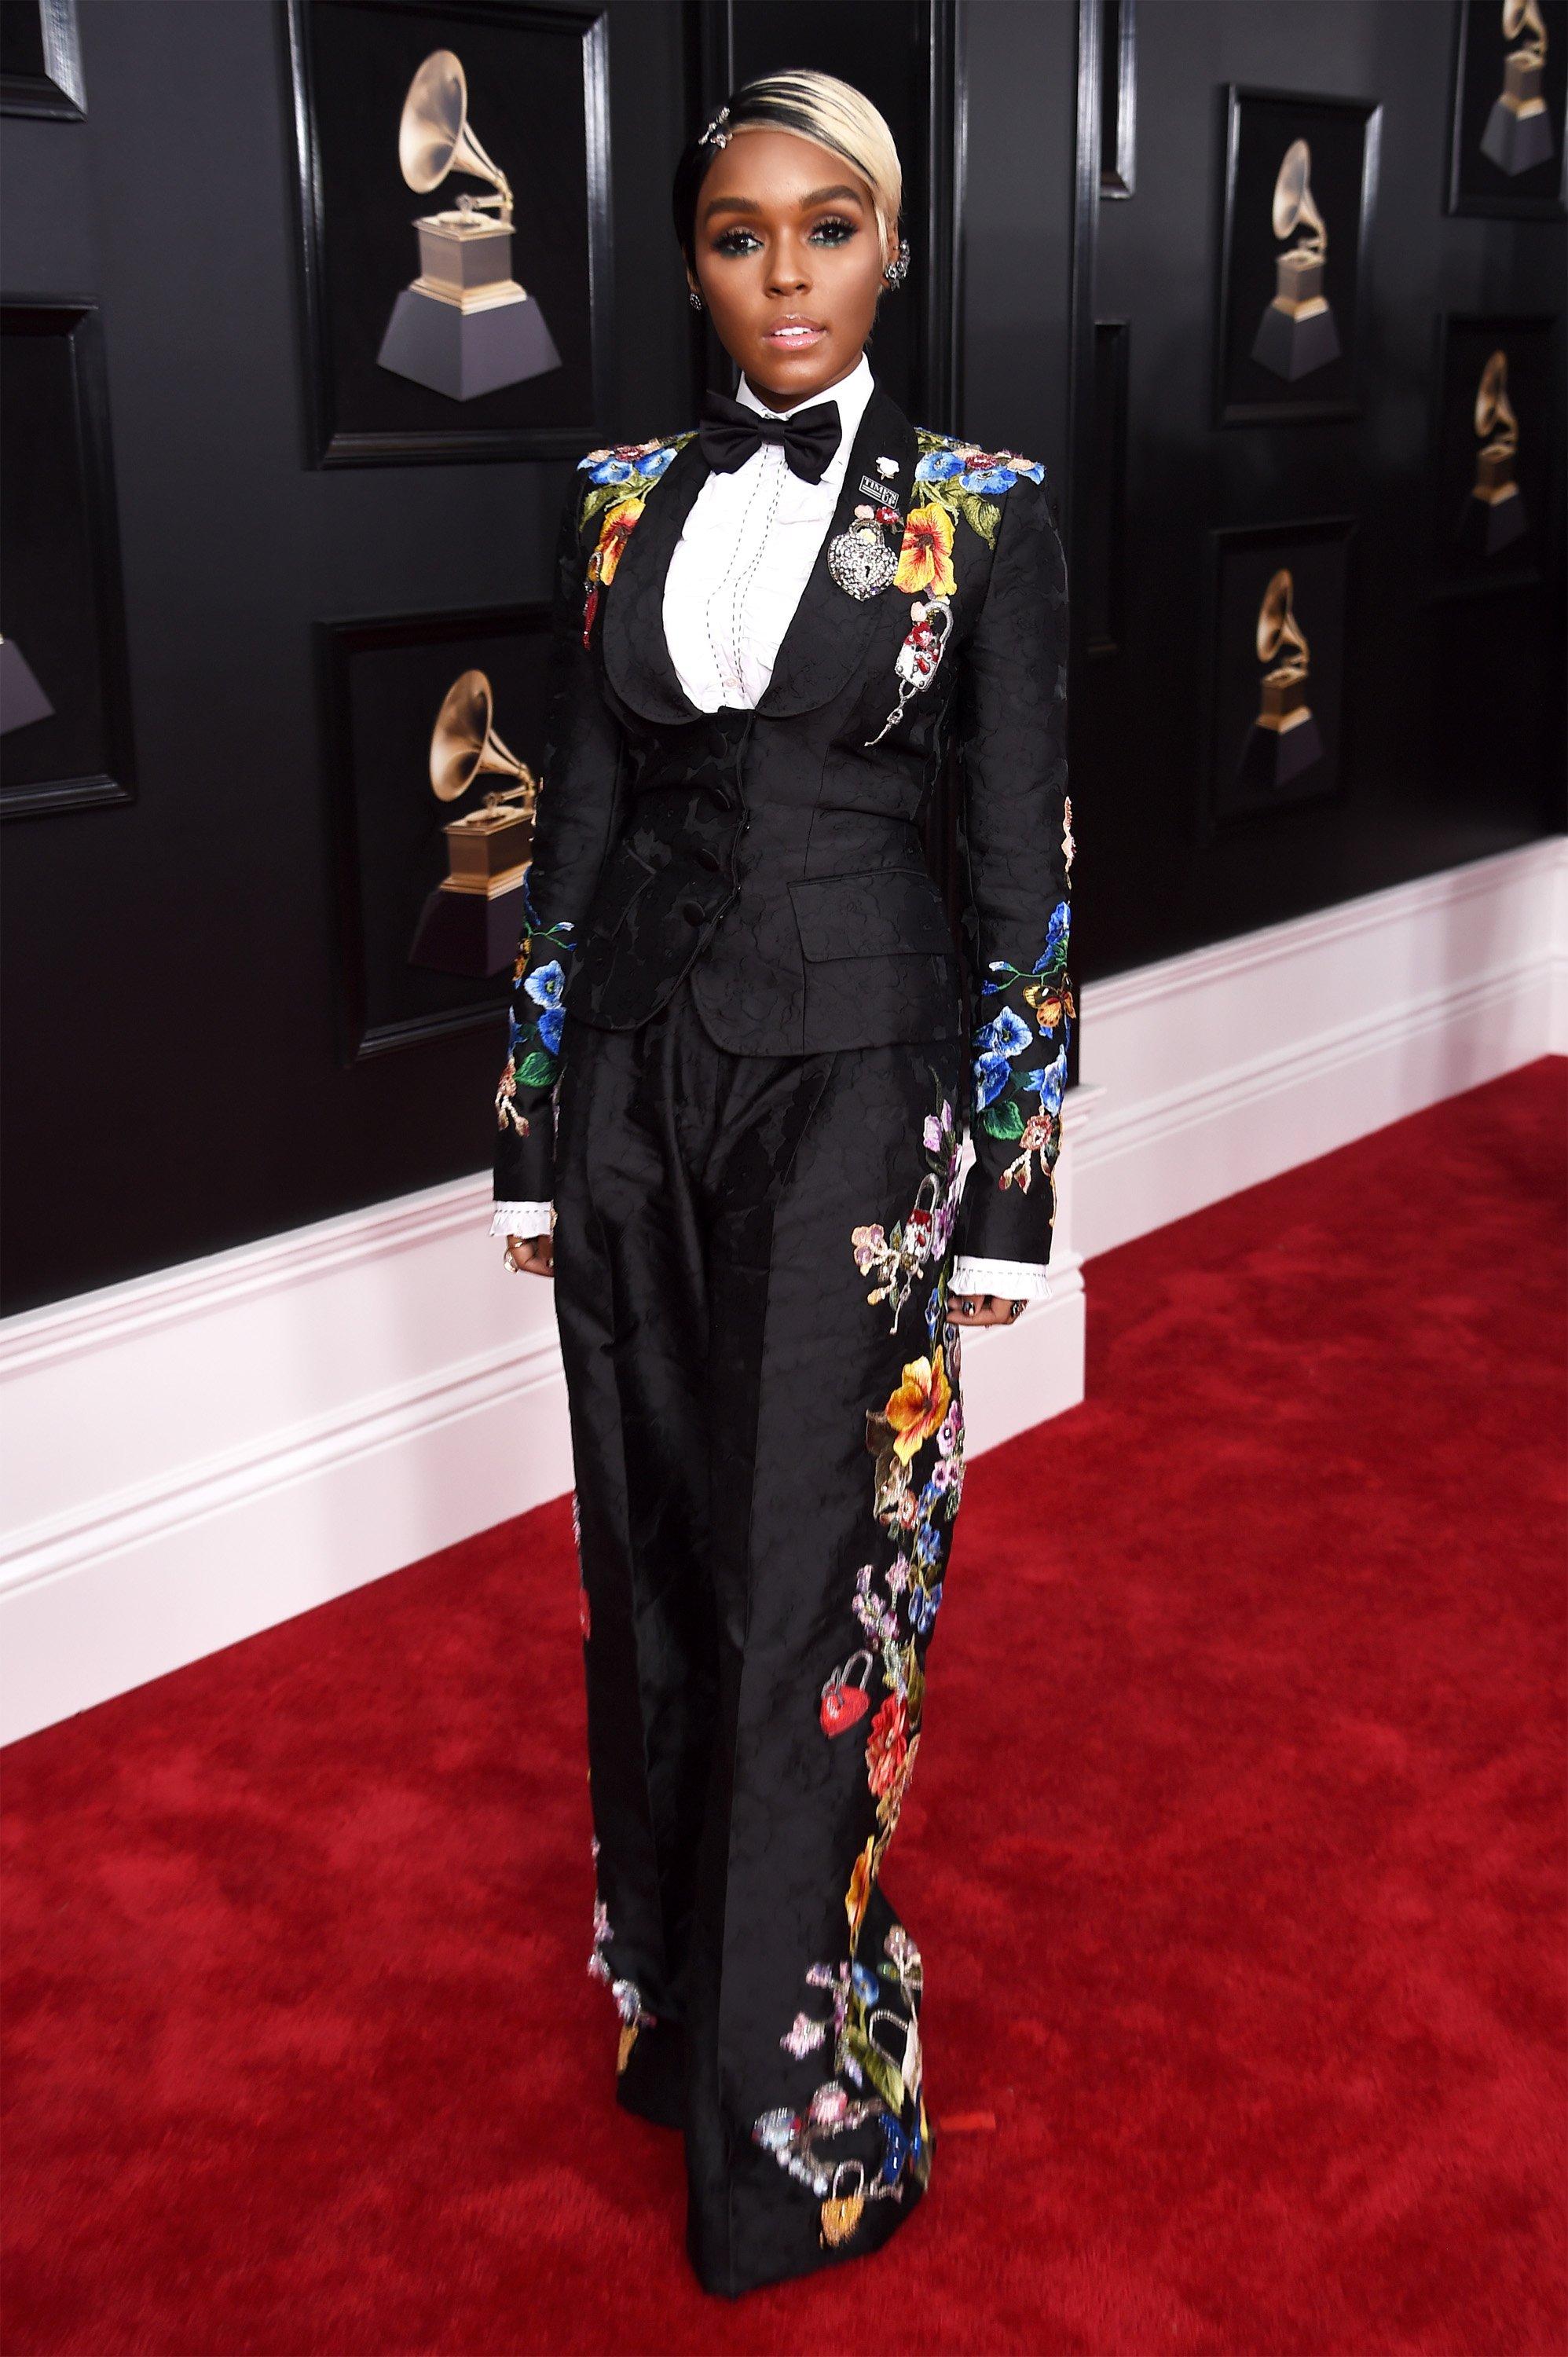 Janelle Monaé at the 60th GRAMMY Awards in 2018